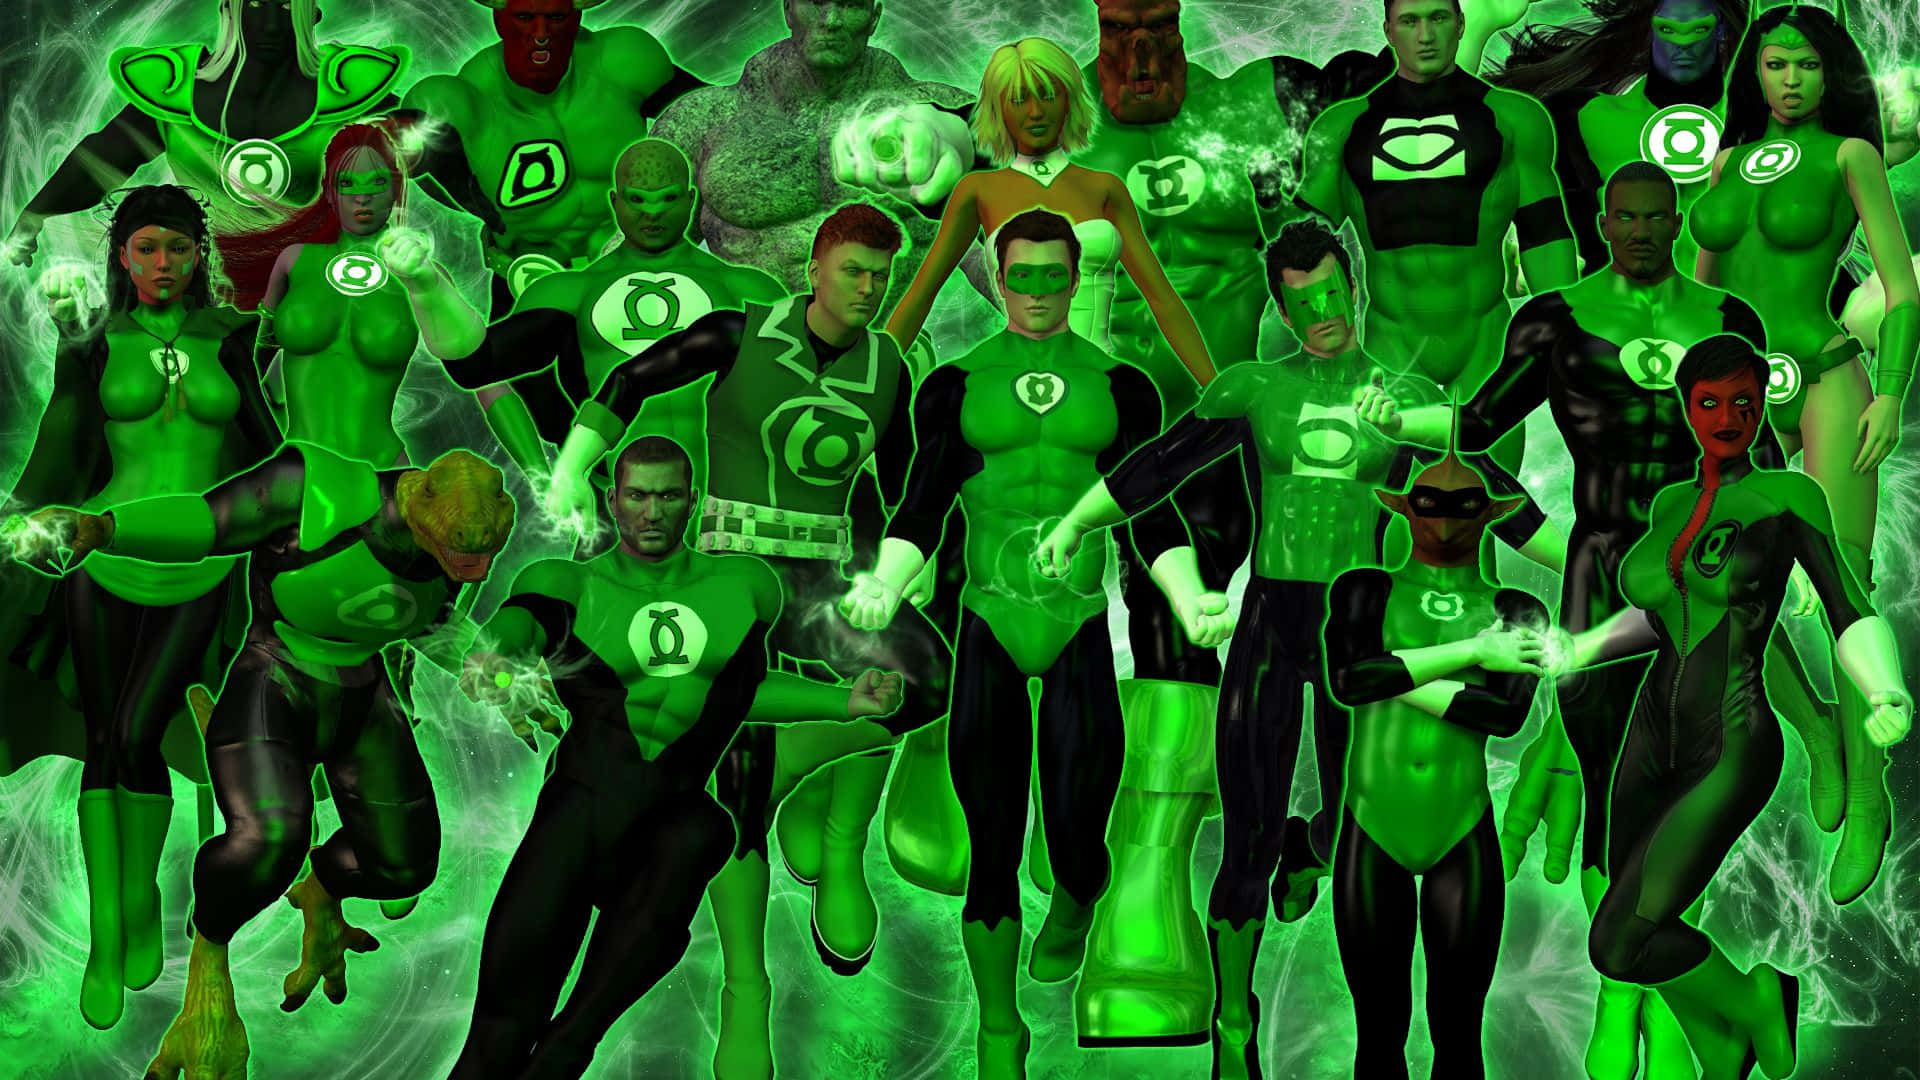 "The Power of Will: The Green Lantern"